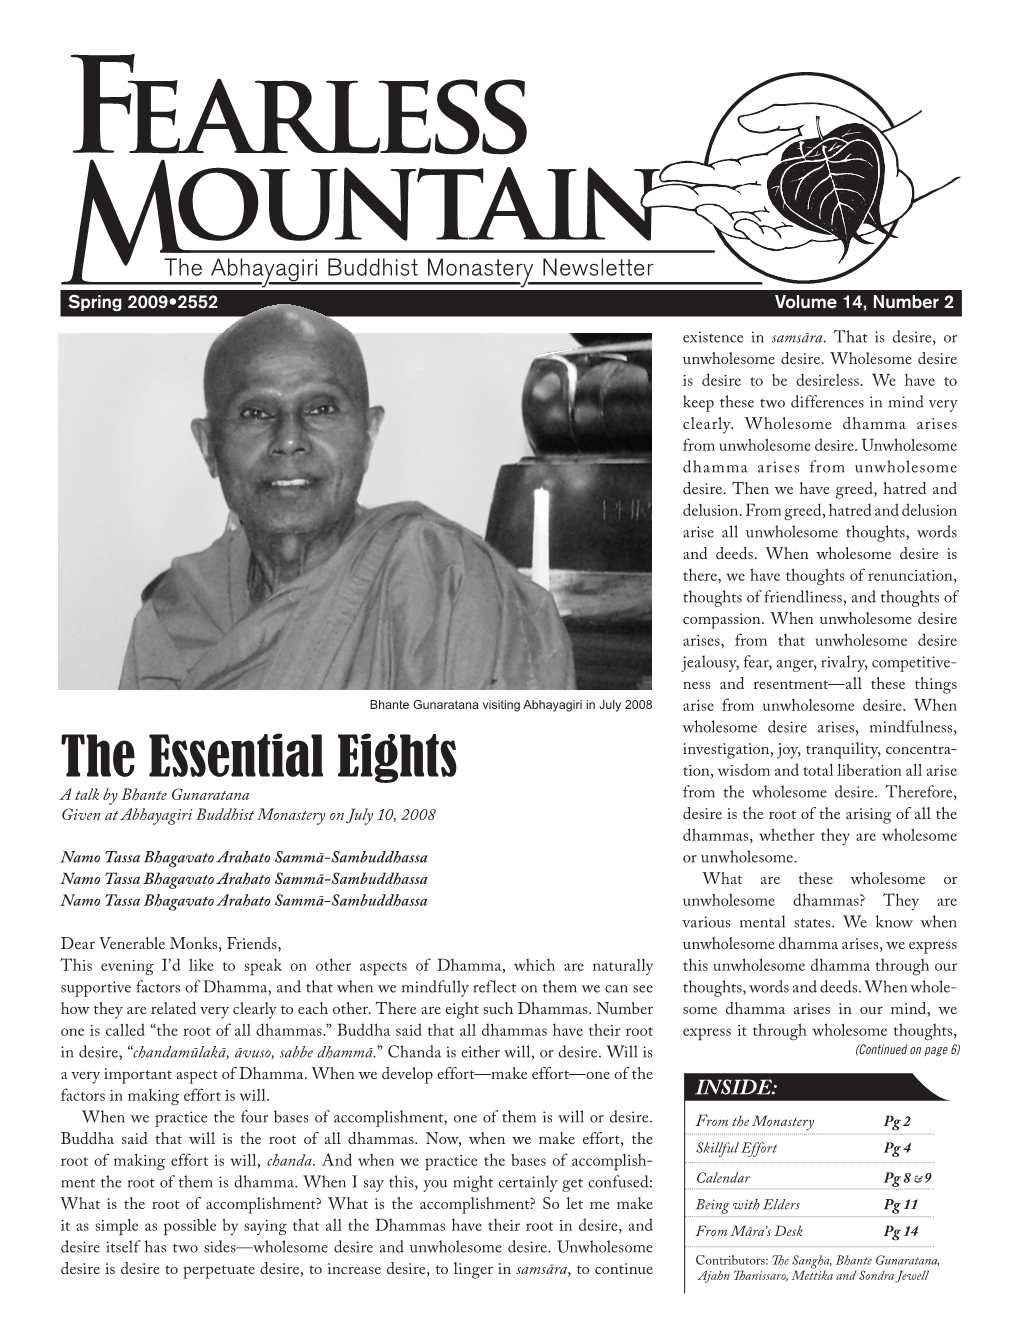 The Essential Eights Tion, Wisdom and Total Liberation All Arise a Talk by Bhante Gunaratana from the Wholesome Desire